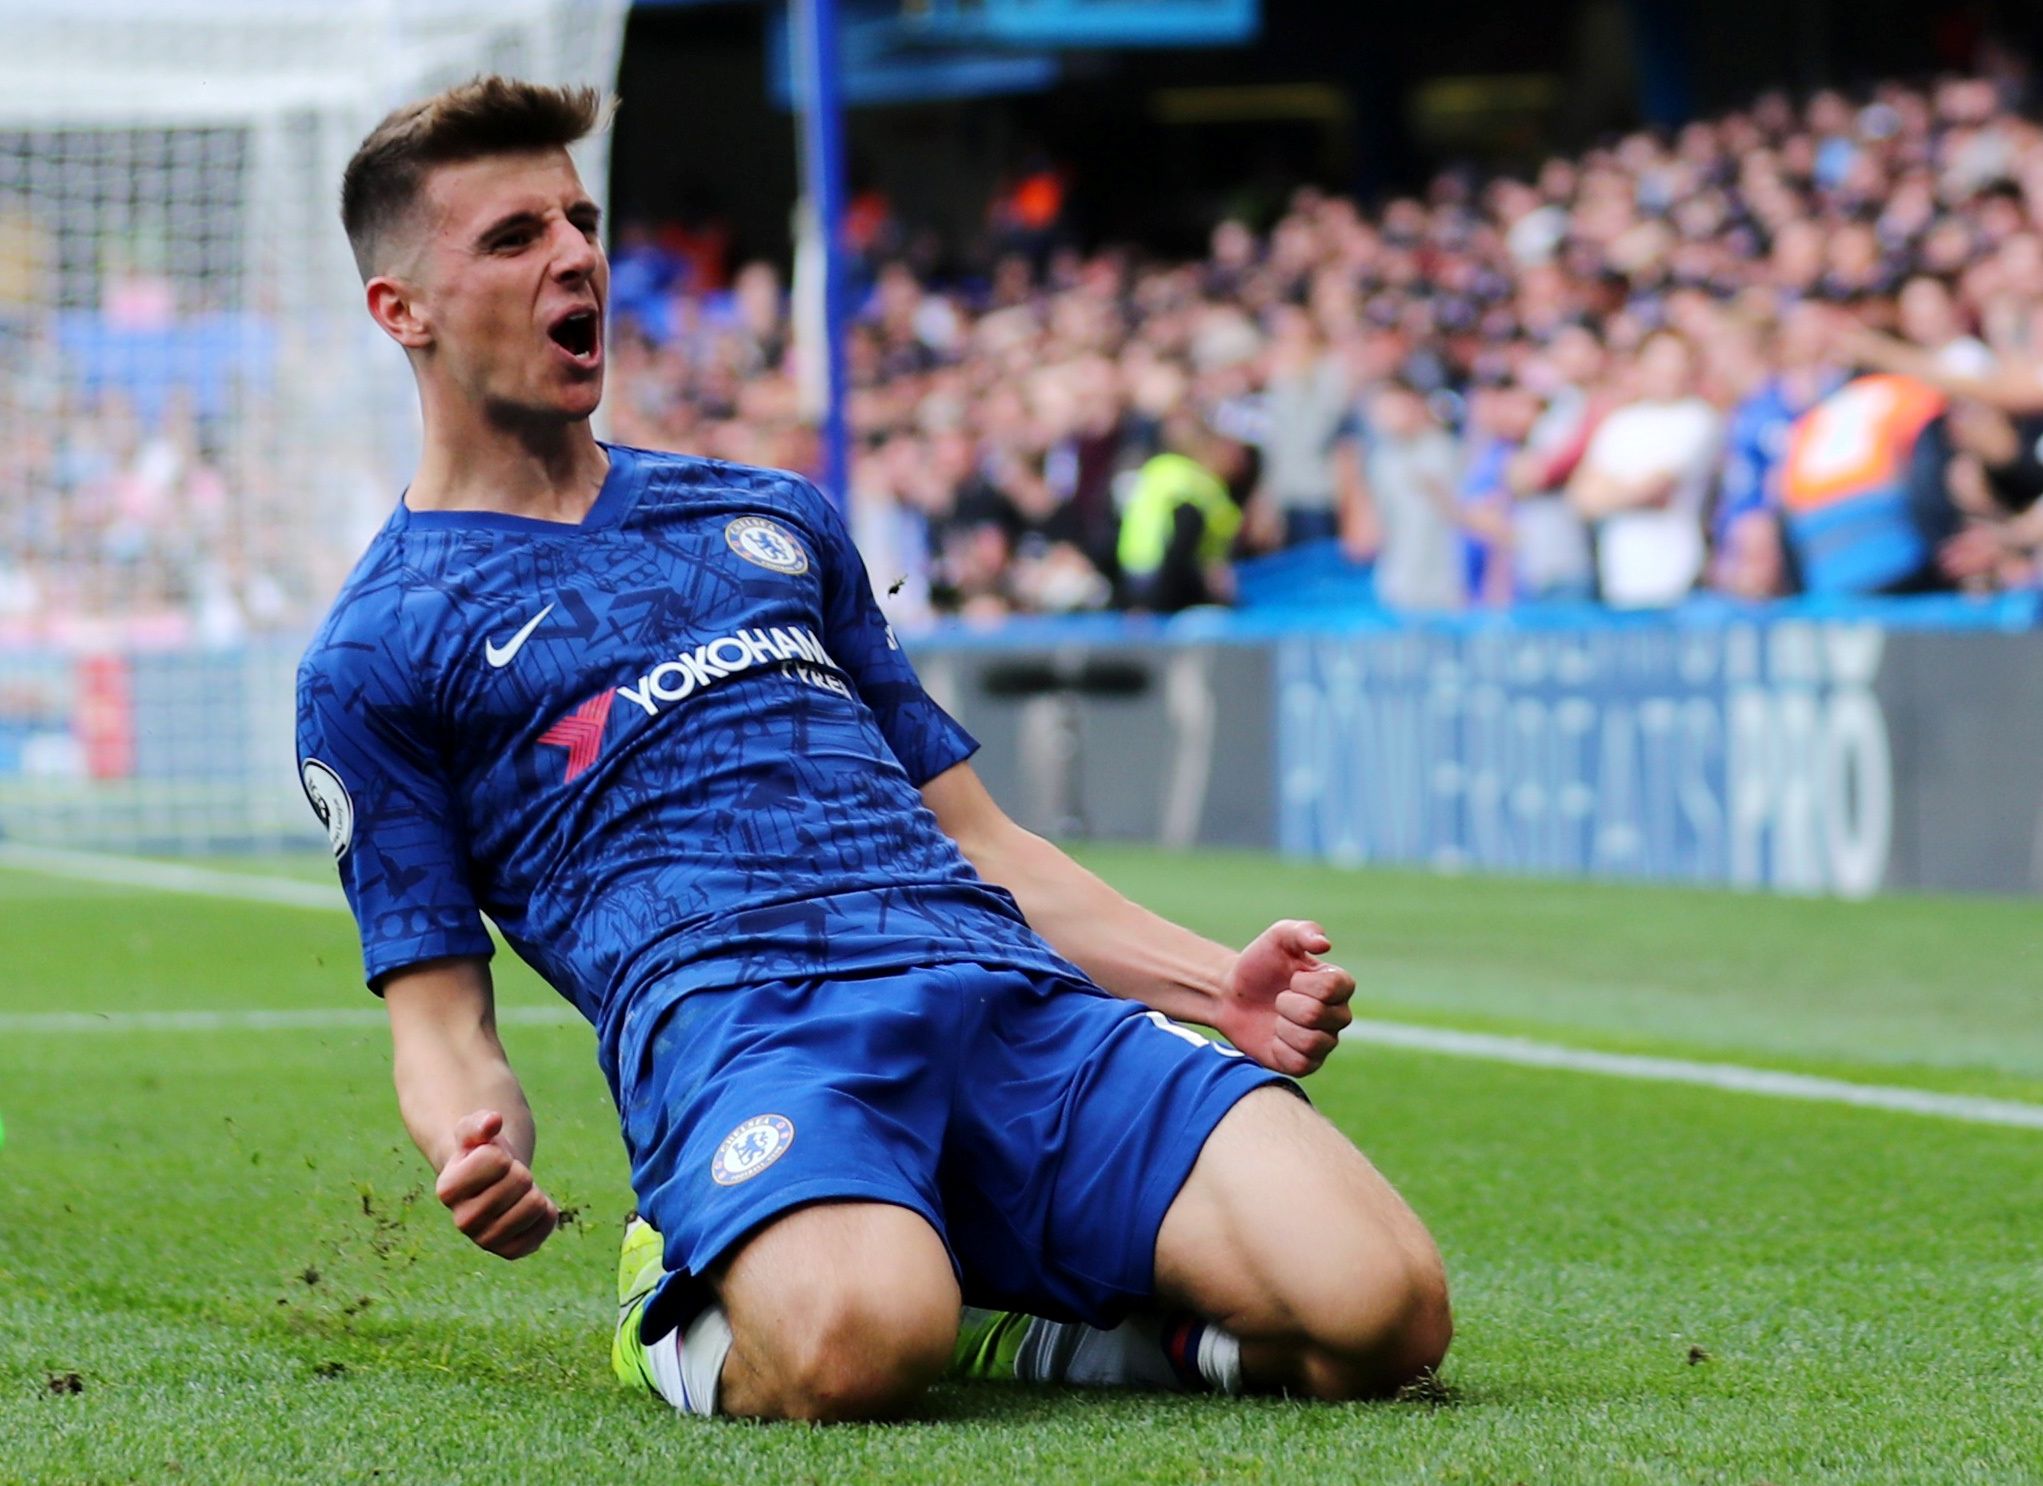 Soccer Football - Premier League - Chelsea v Leicester City - Stamford Bridge, London, Britain - August 18, 2019  Chelsea's Mason Mount celebrates scoring their first goal   REUTERS/Eddie Keogh  EDITORIAL USE ONLY. No use with unauthorized audio, video, data, fixture lists, club/league logos or "live" services. Online in-match use limited to 75 images, no video emulation. No use in betting, games or single club/league/player publications.  Please contact your account representative for further d